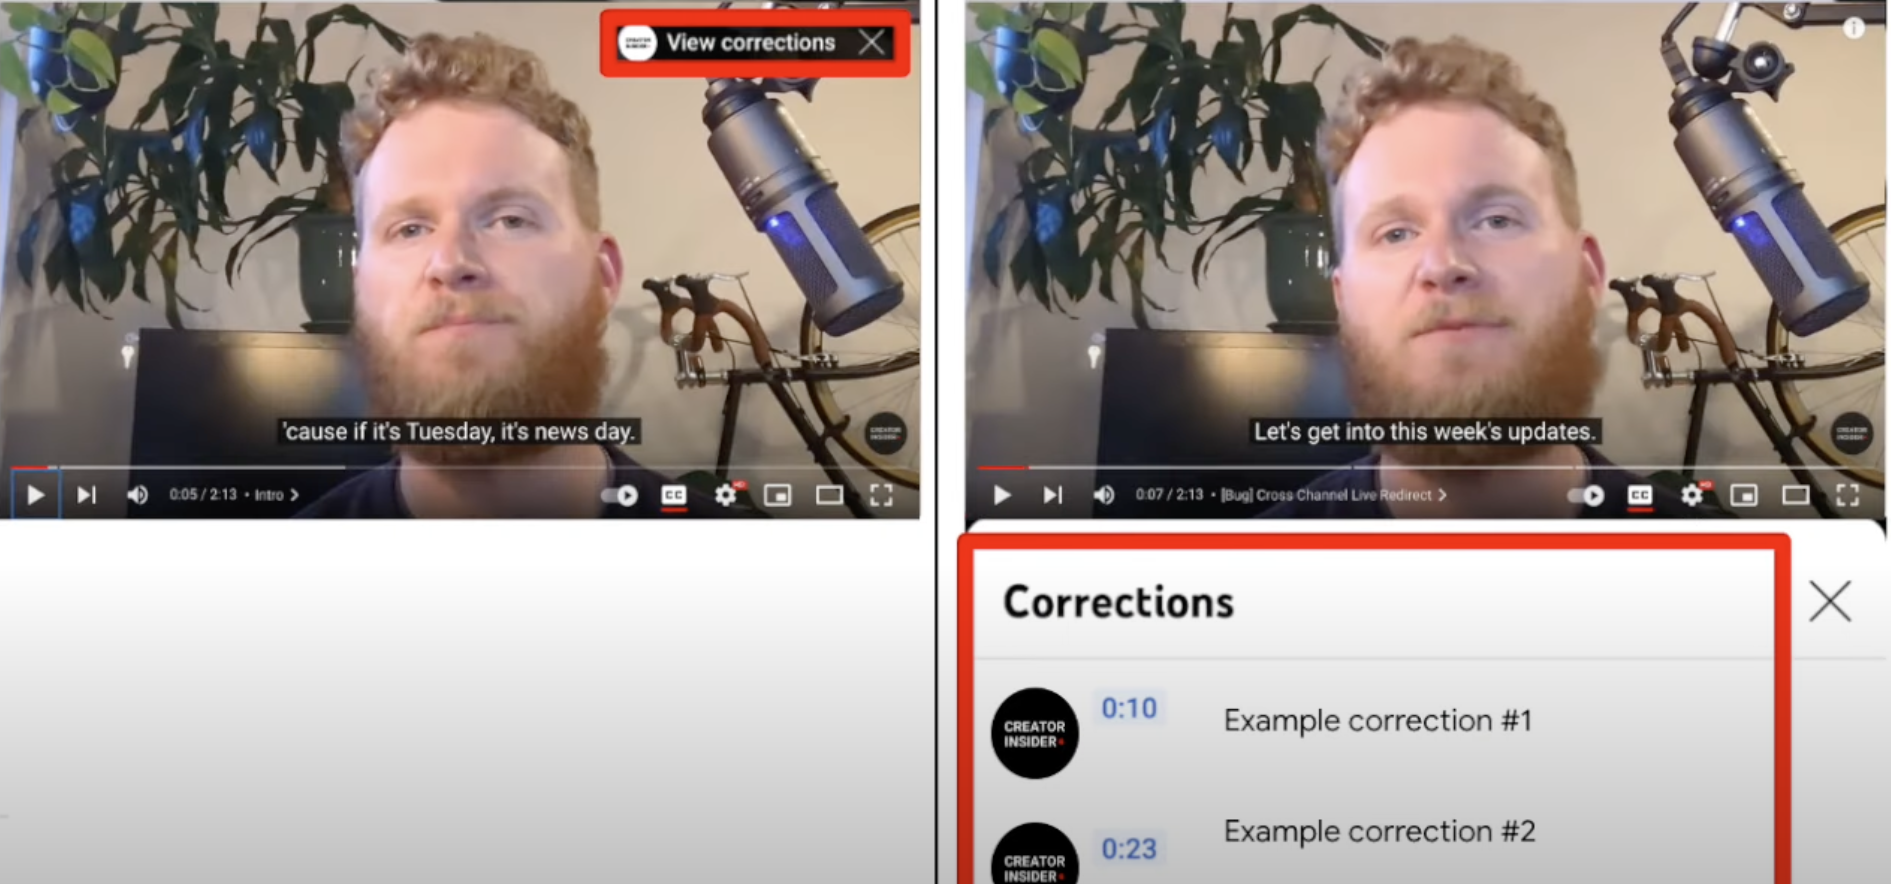 You can now add corrections to YouTube videos after publishing